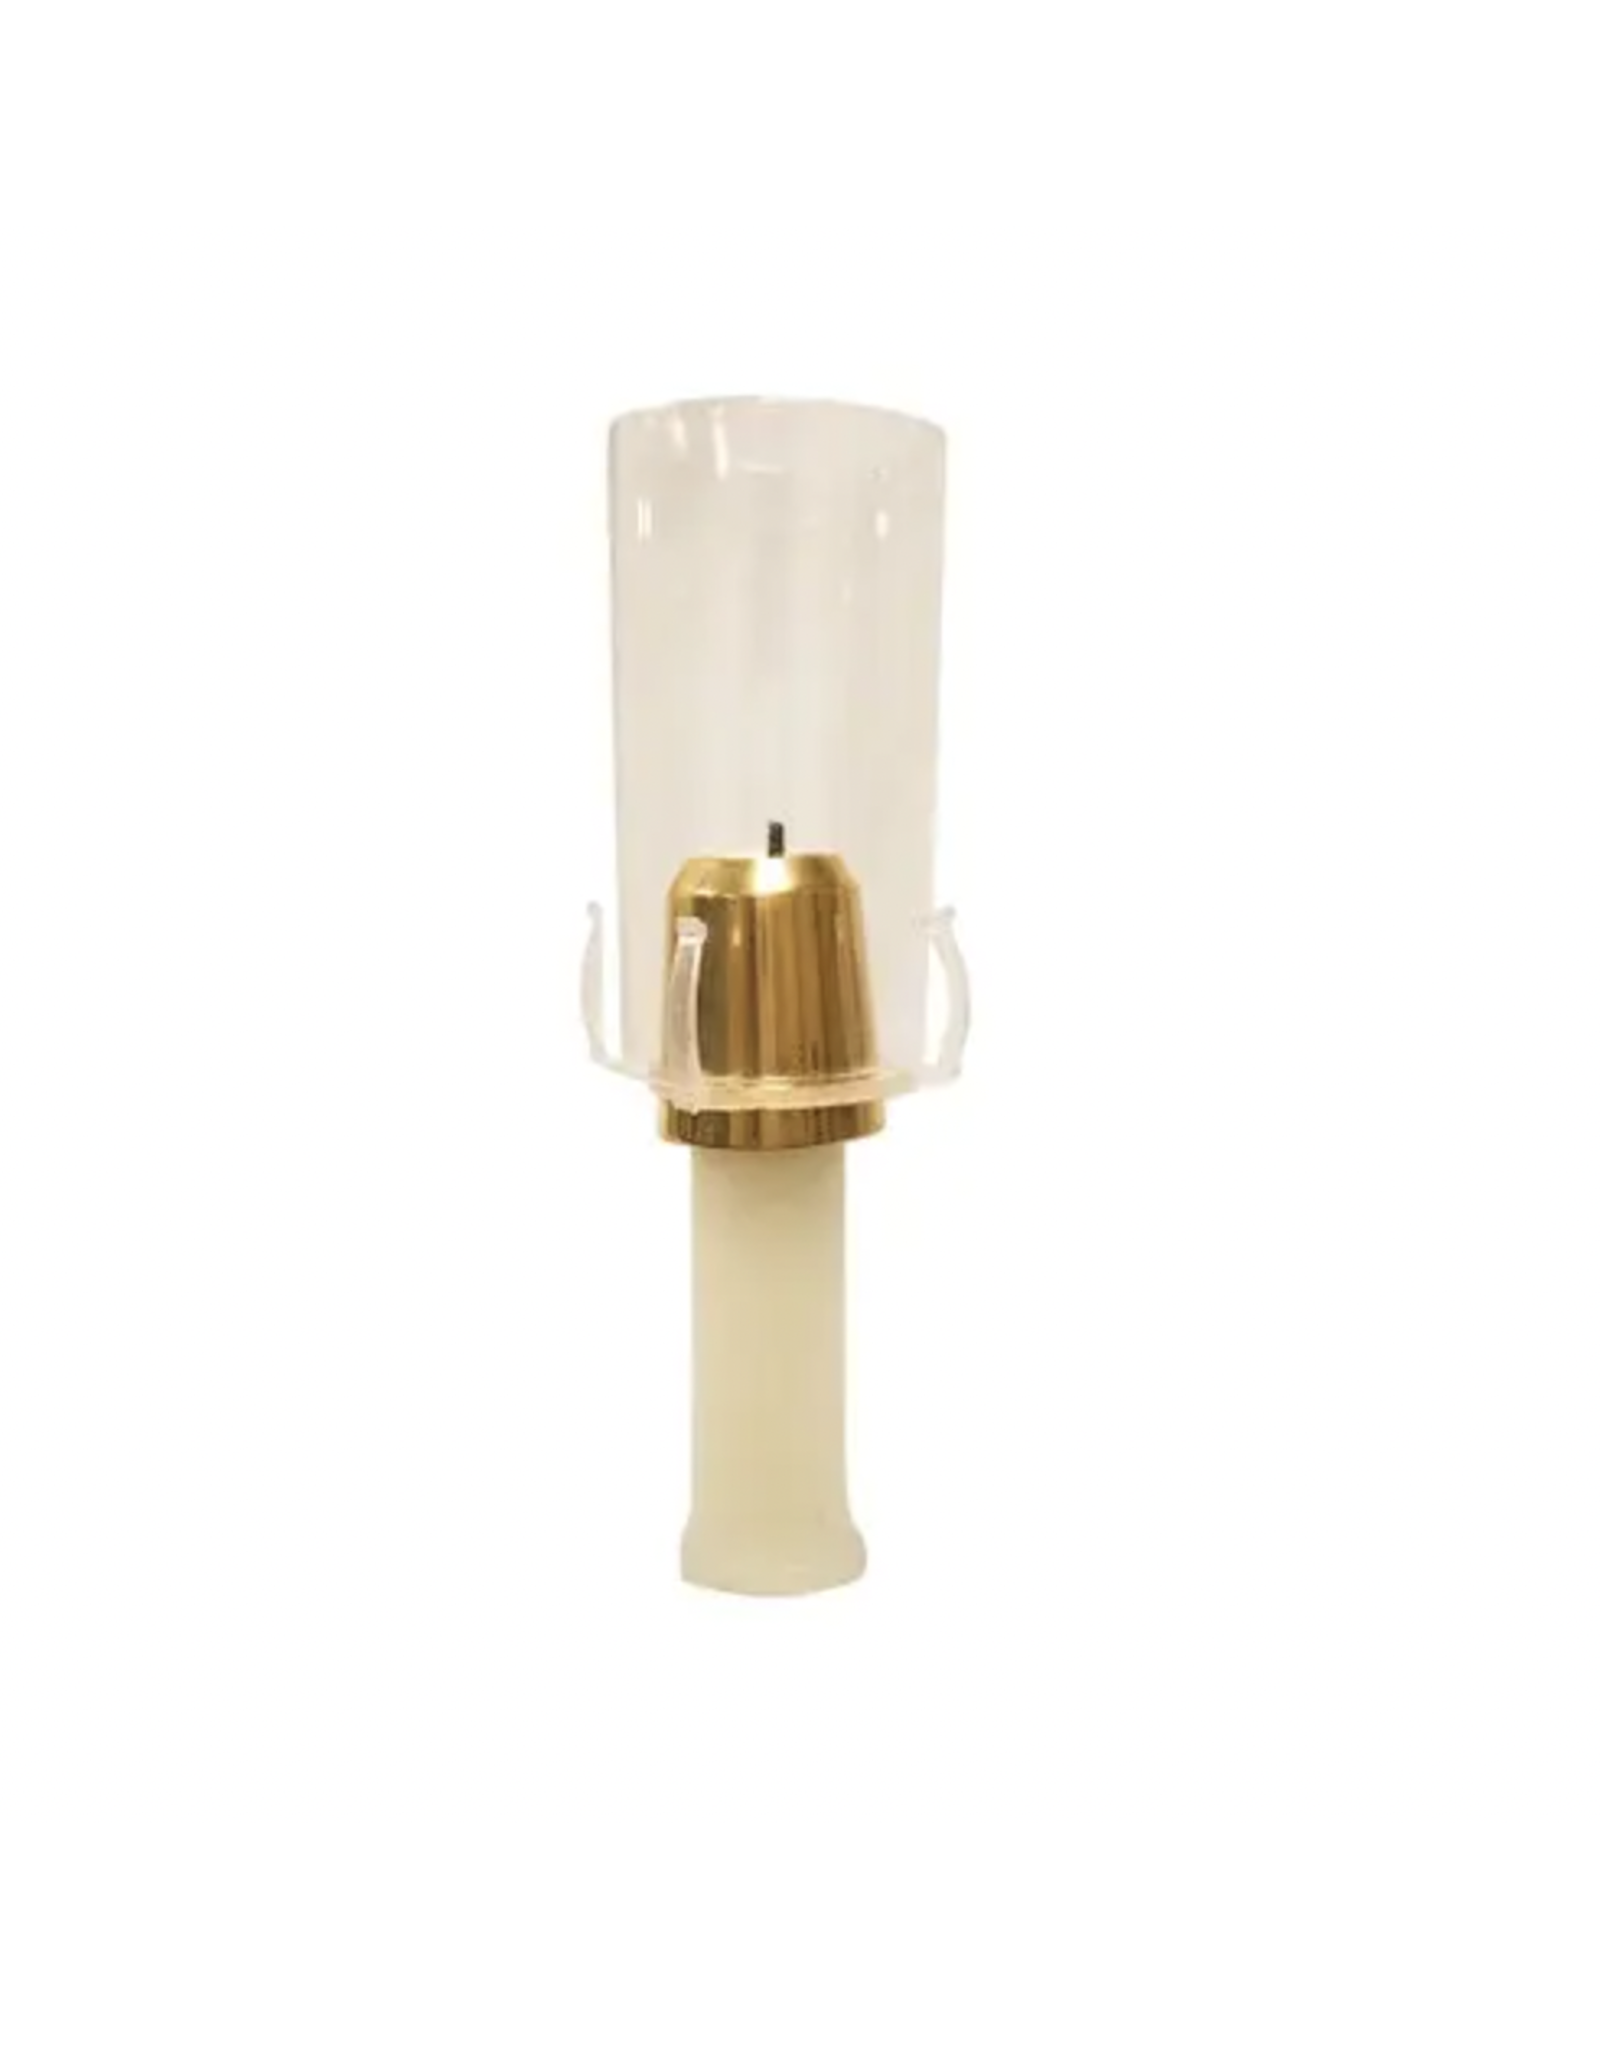 Ziegler Candle Follower, High Polish, for 1" Candle Diameter with Glass Deflector